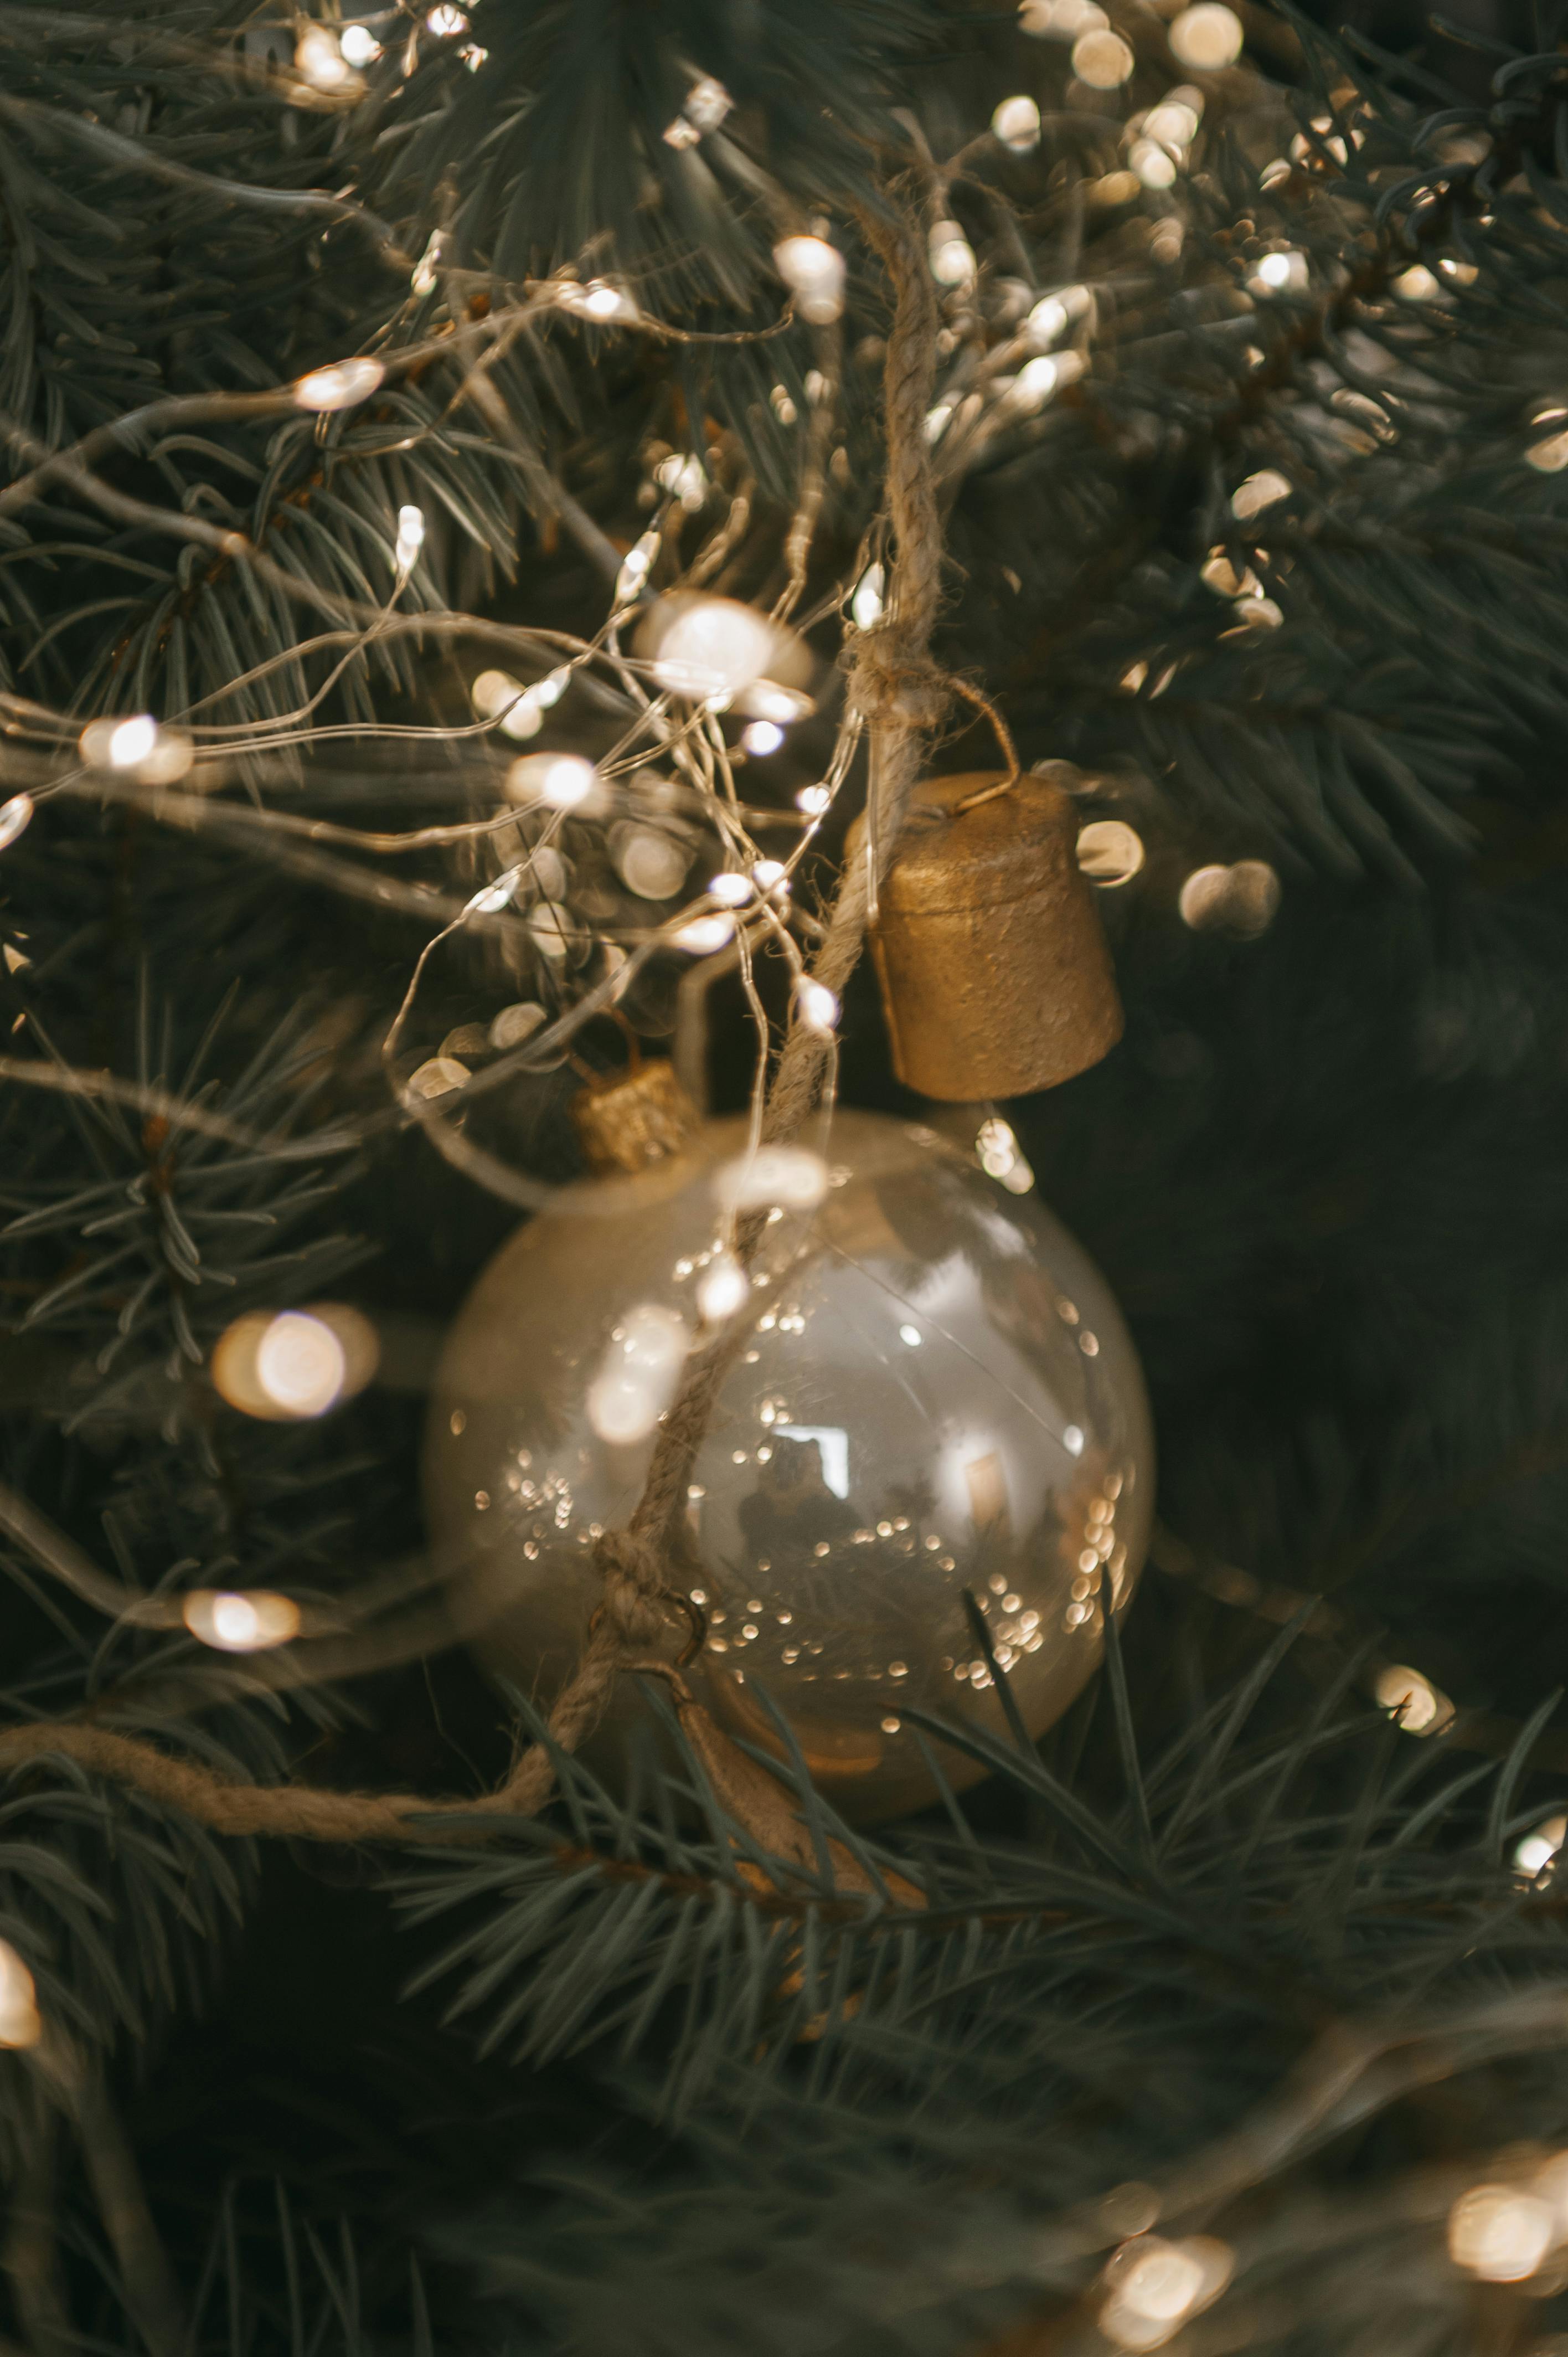 A Silver Christmas Tree with Gold Christmas Ornaments · Free Stock Photo